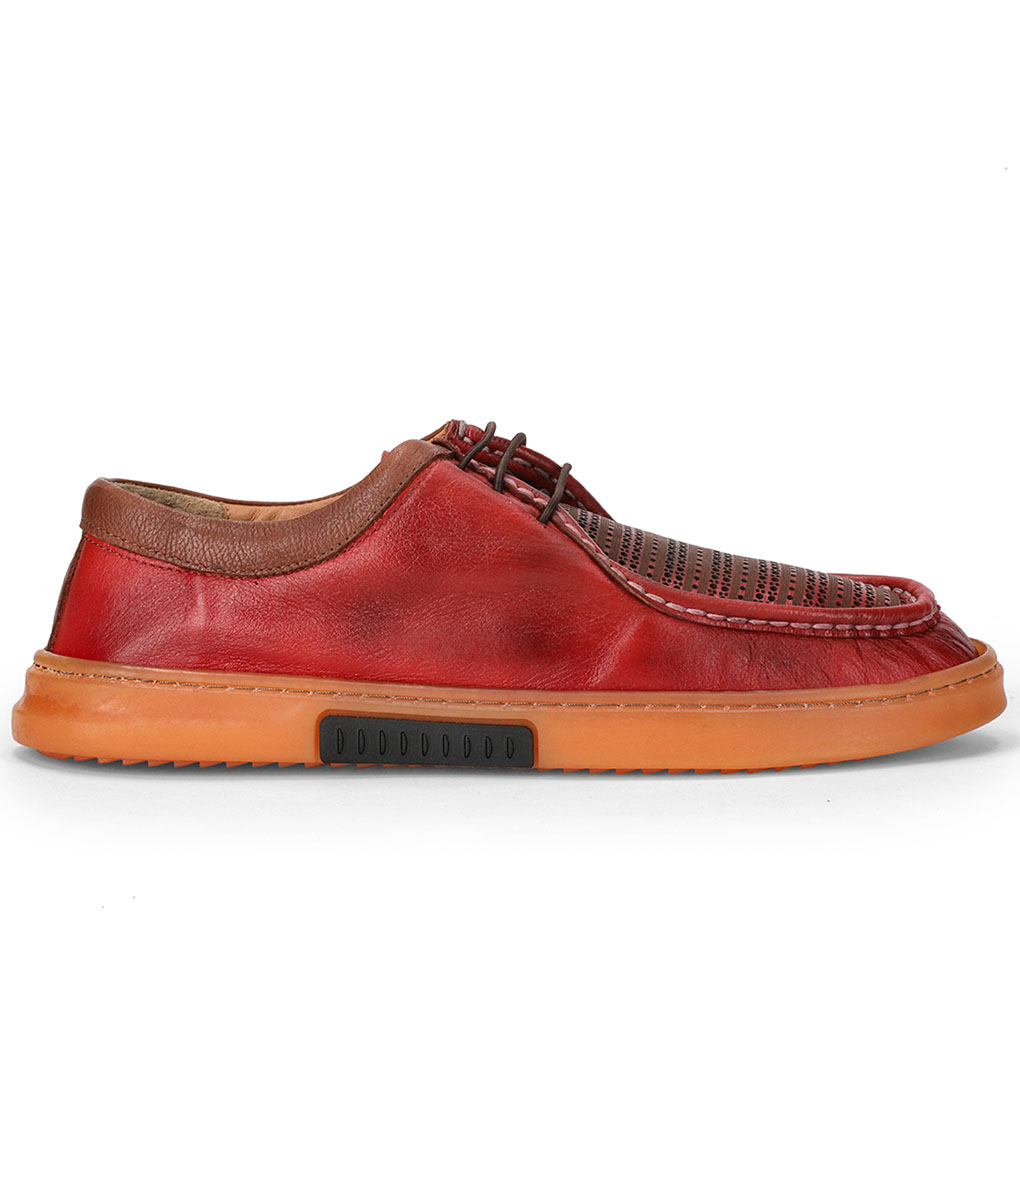 Men's Handmade Casual Coal Red Leather Shoes